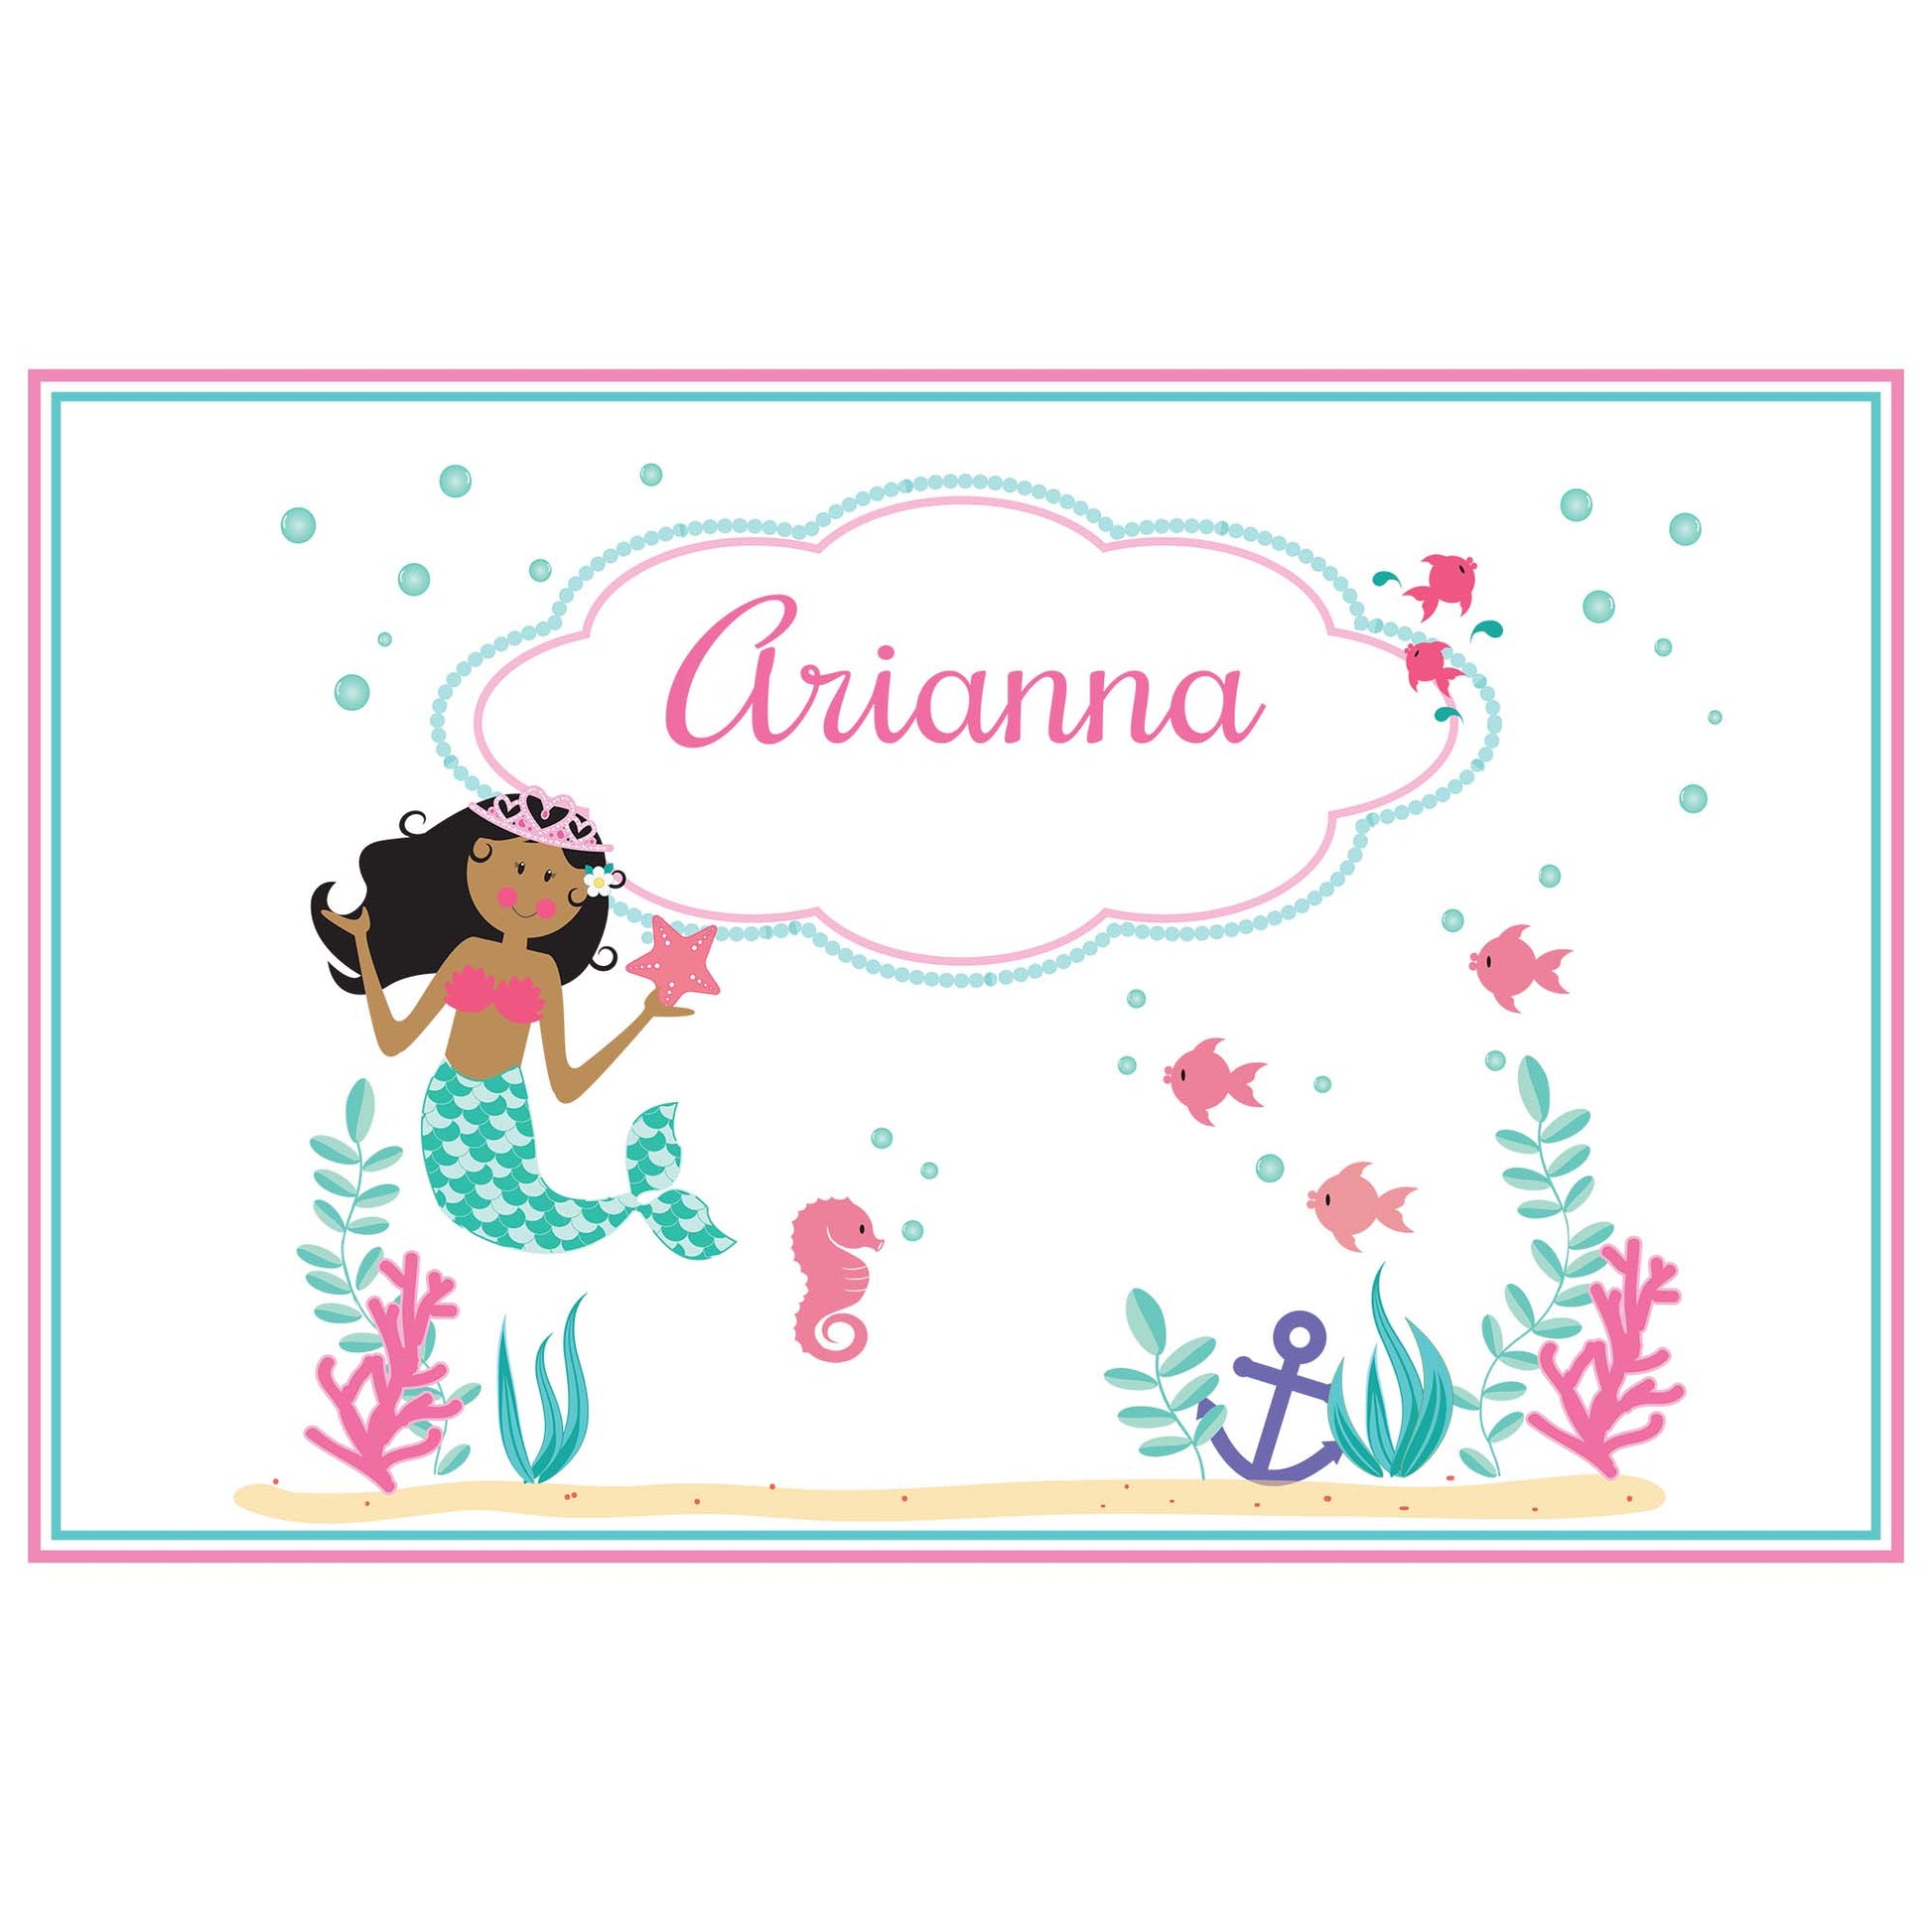 Personalized Placemat with African American Mermaid Princess design